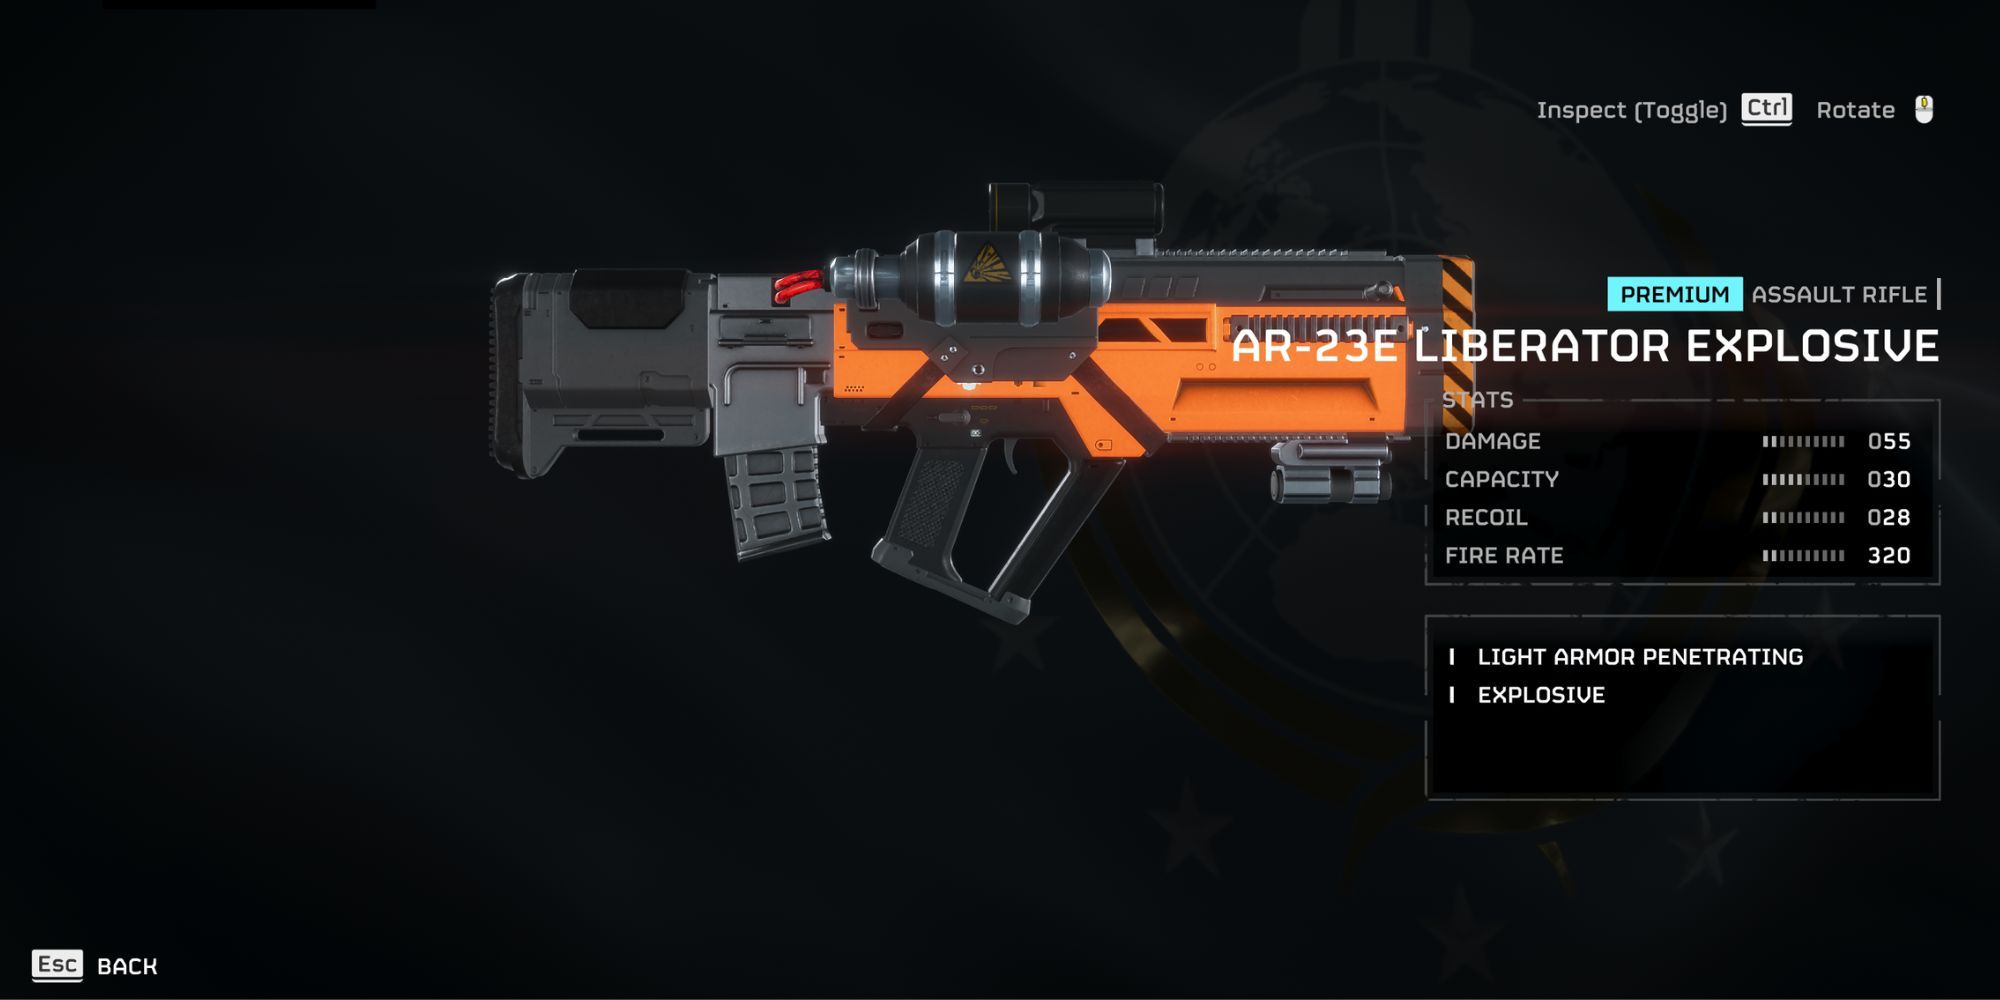 a screenshot of the details page for the AR-23E Liberator Explosive weapon